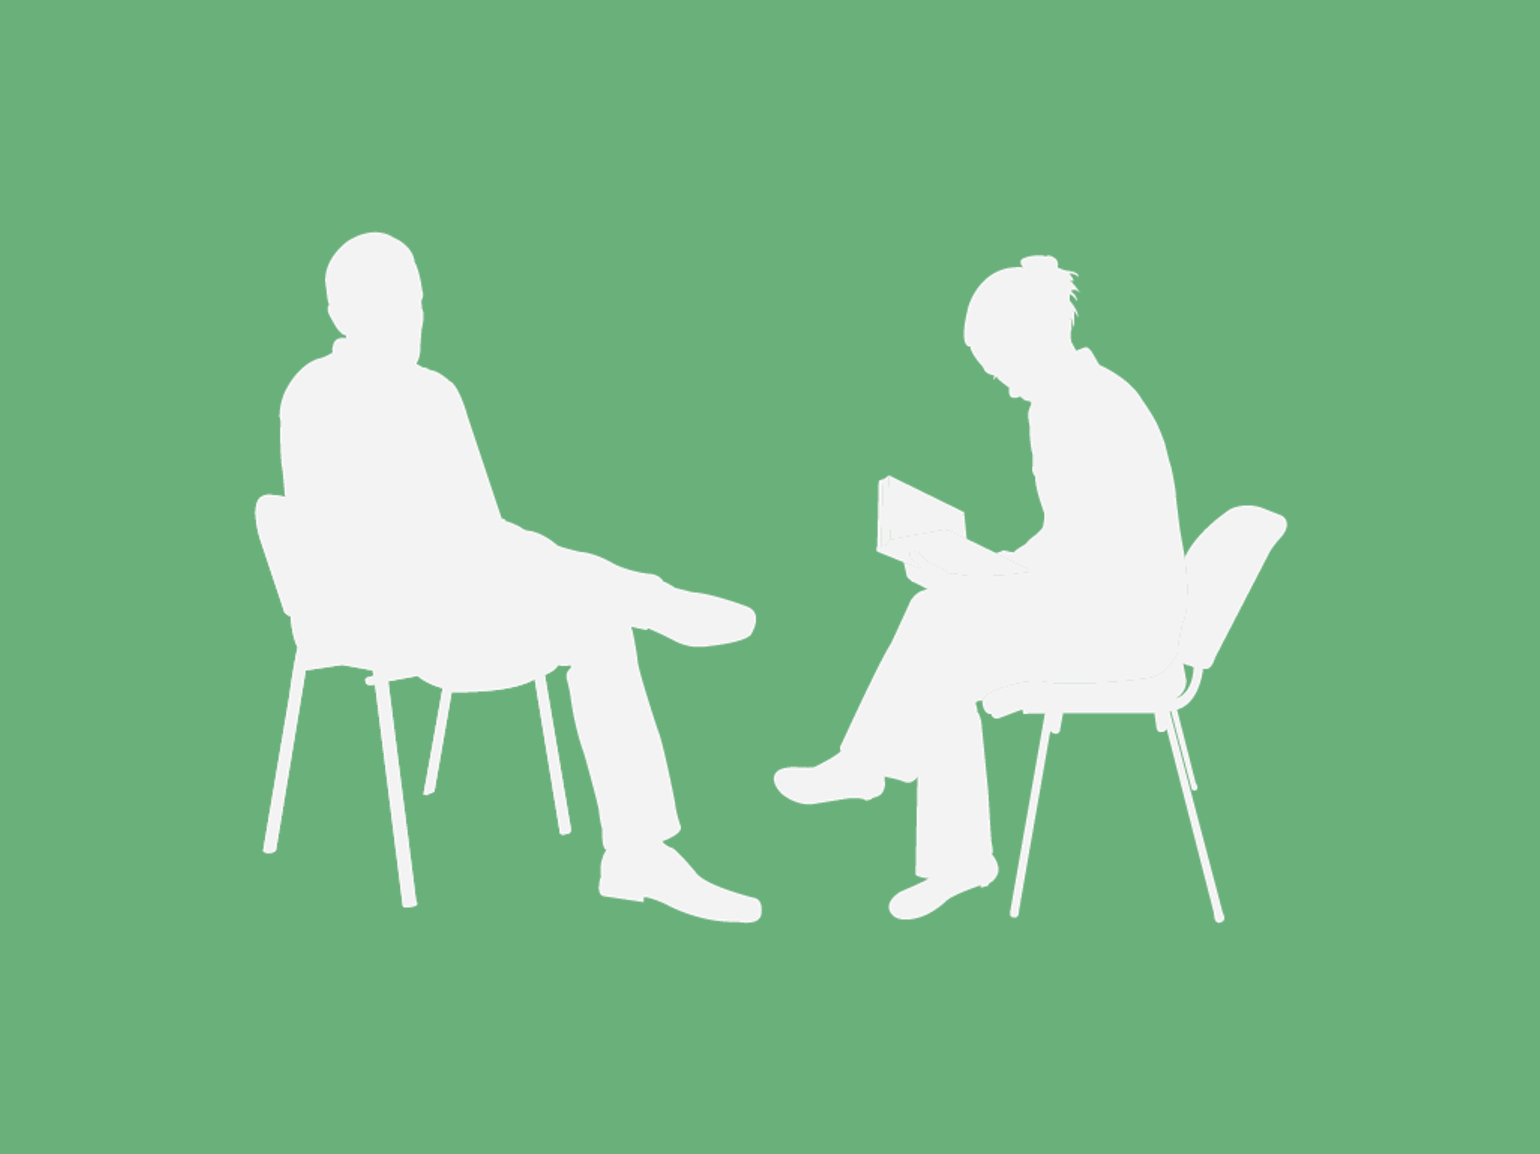 silhouette of two people in counselling